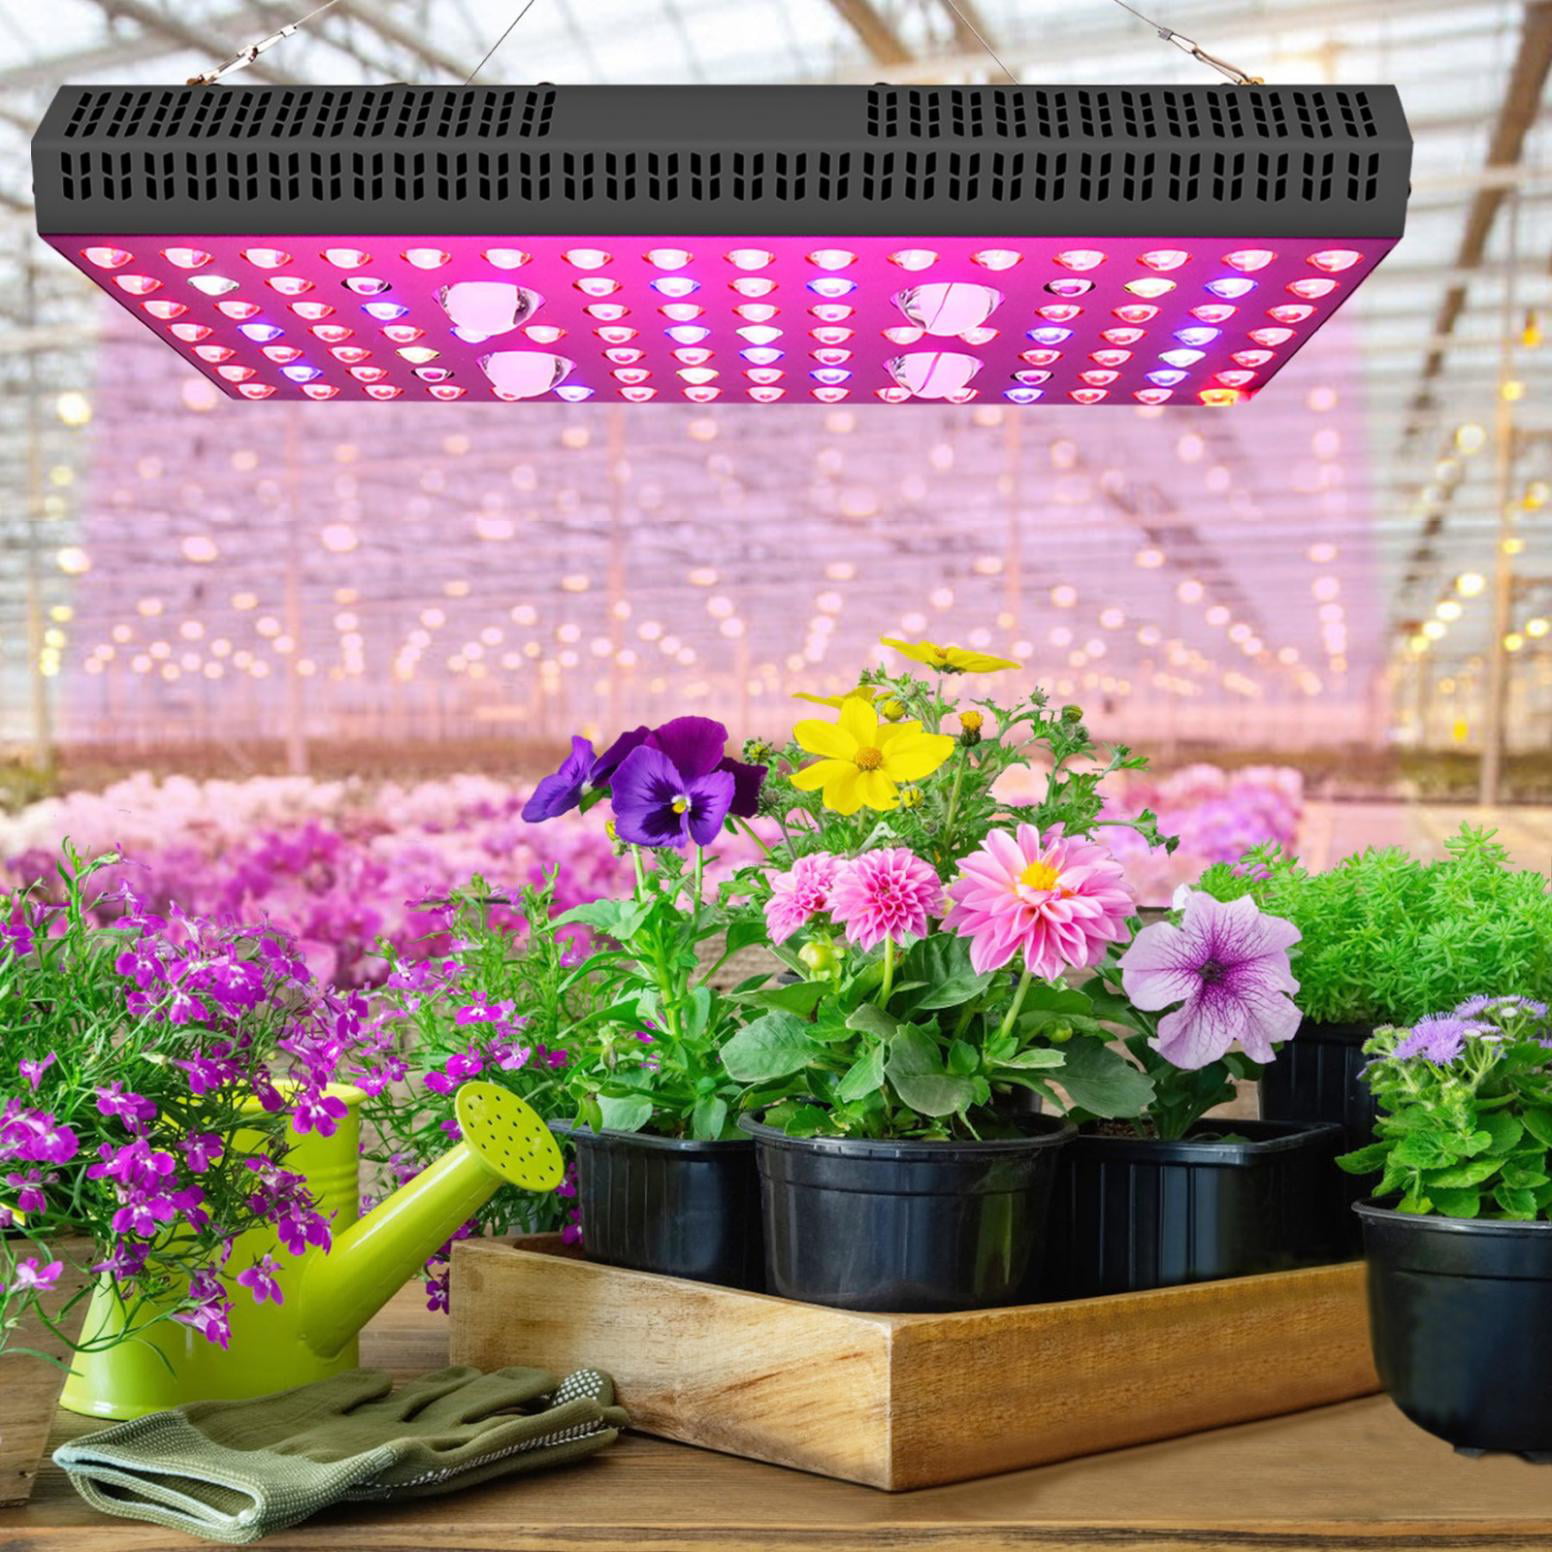 COB Full Spectrum LED Grow Light Growing Lamp for Flower Hydroponic Greenhouse 